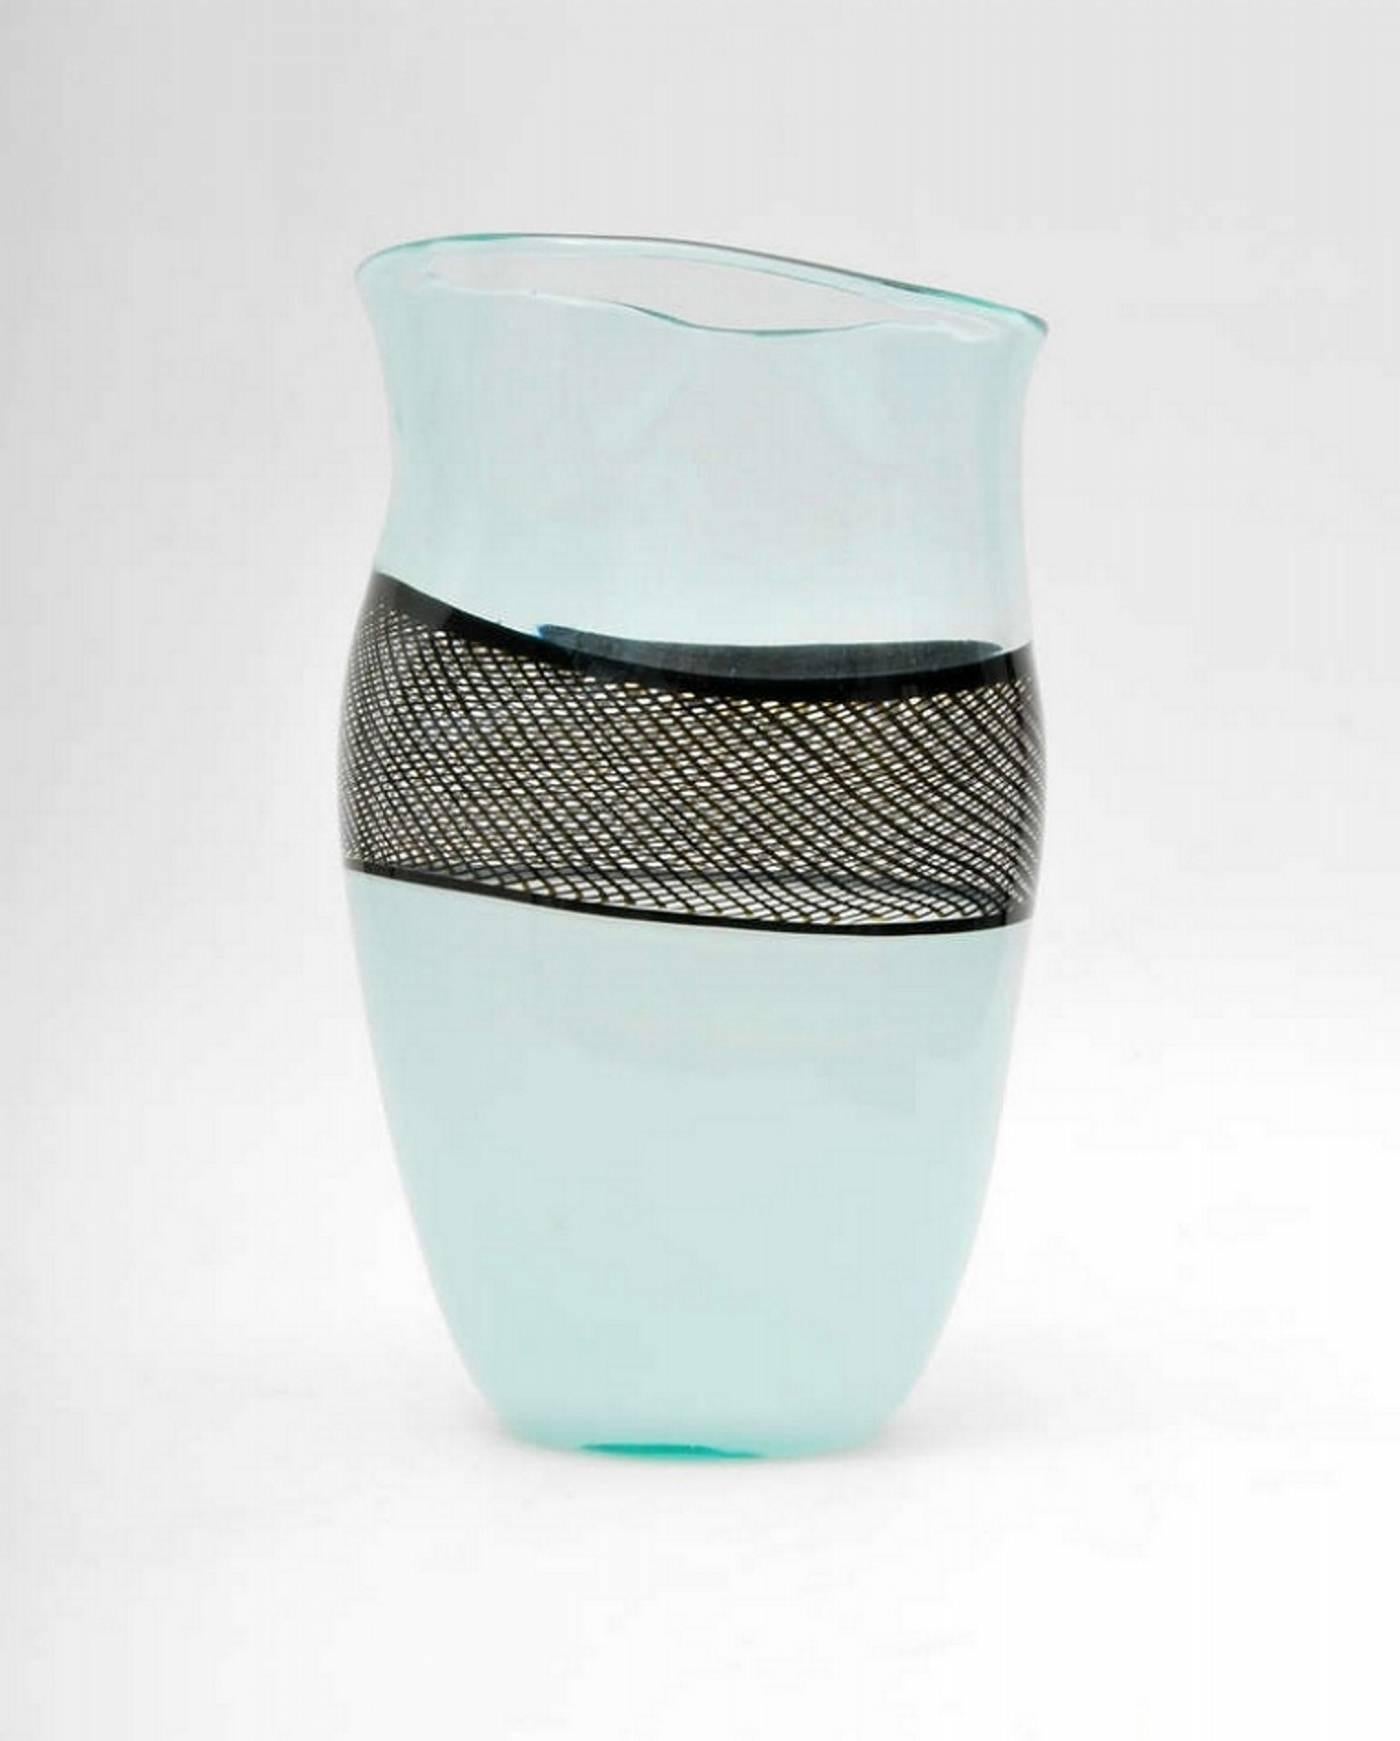 Giampaolo Seguso Refolo Vase, Limited Edition In Good Condition For Sale In West Palm Beach, FL